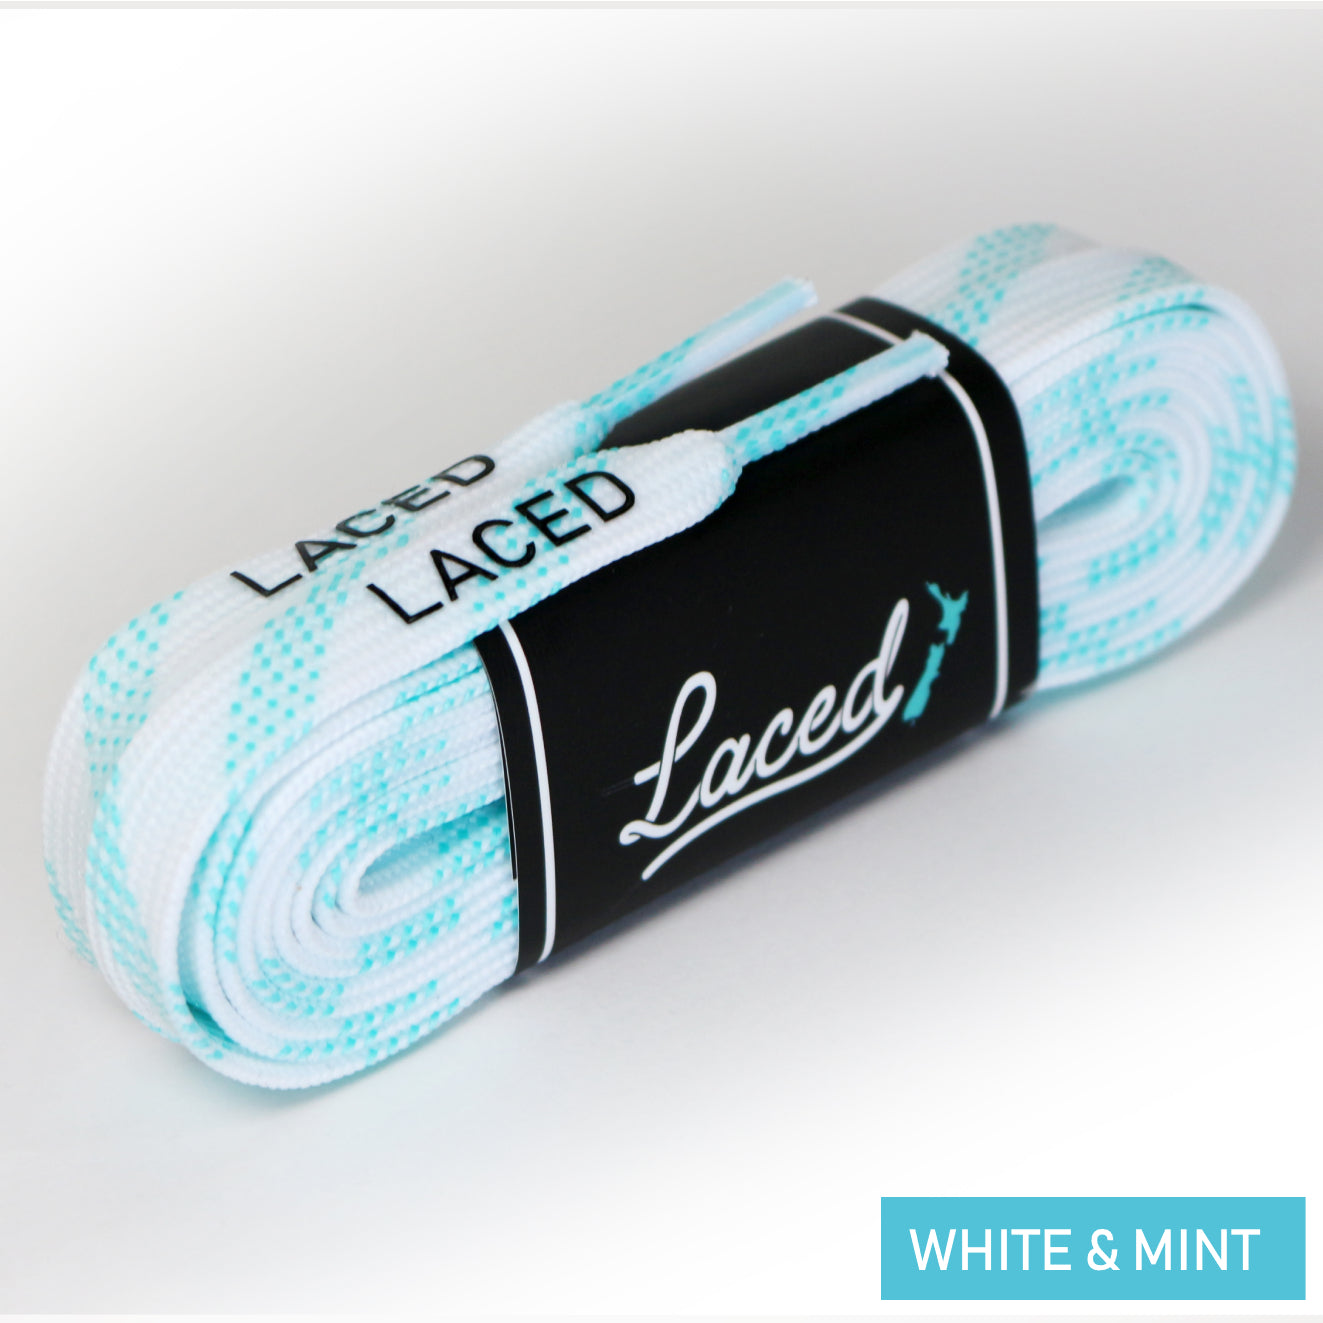 3 Pack of Laced Laces